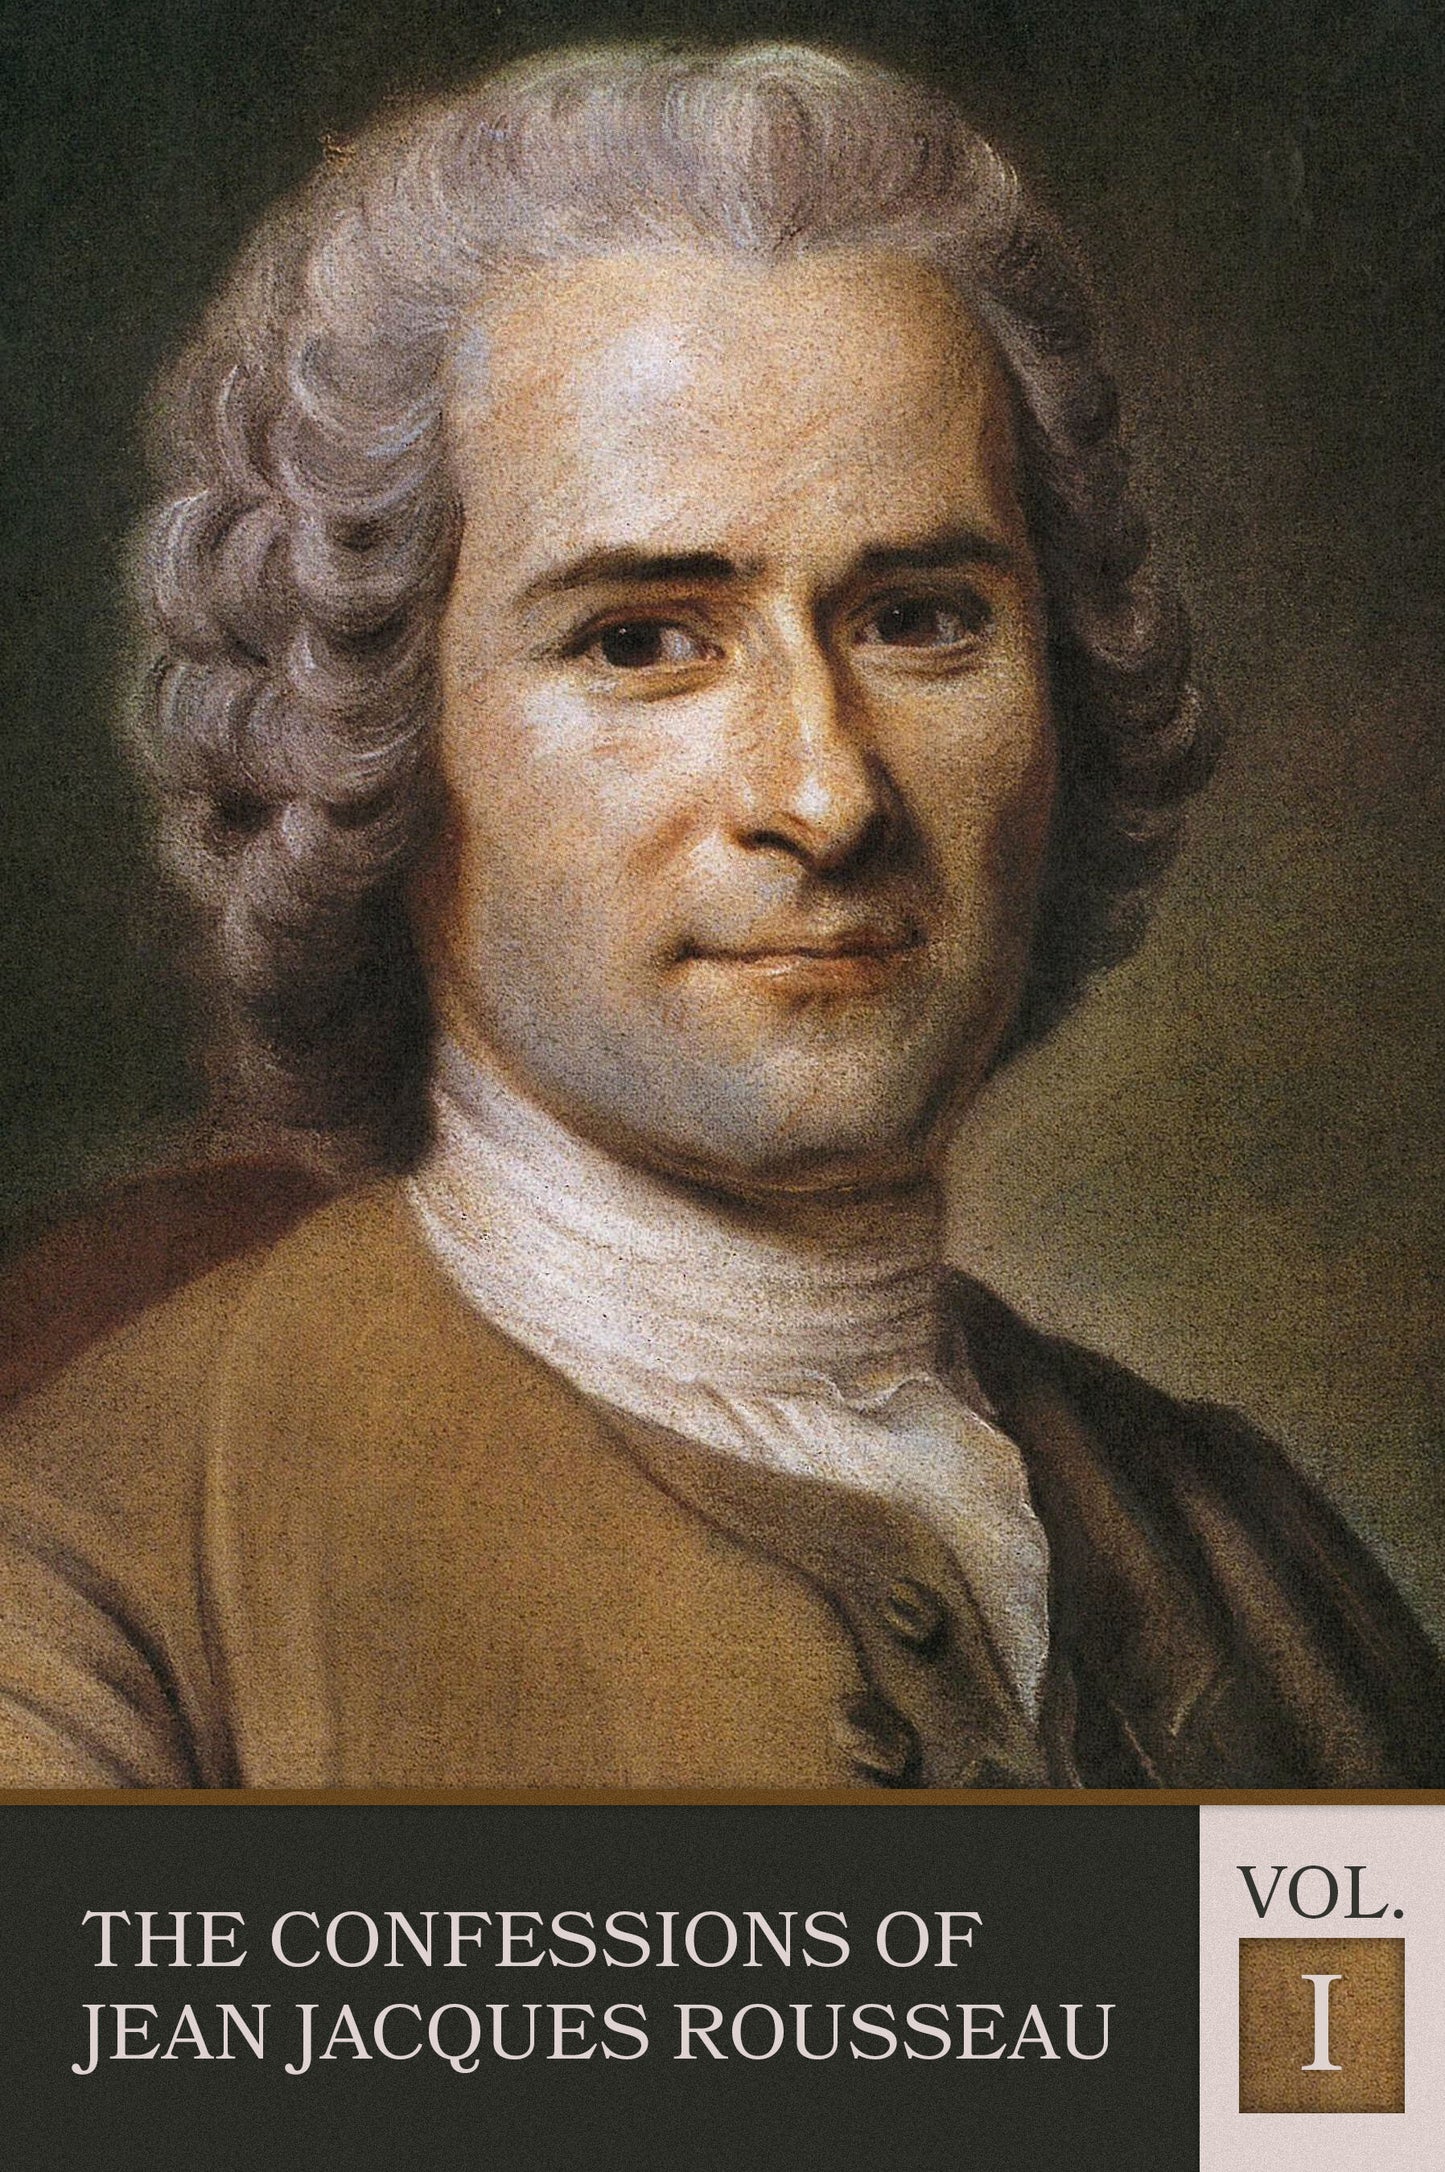 The Confessions of Jean Jacques Rousseau Volume I